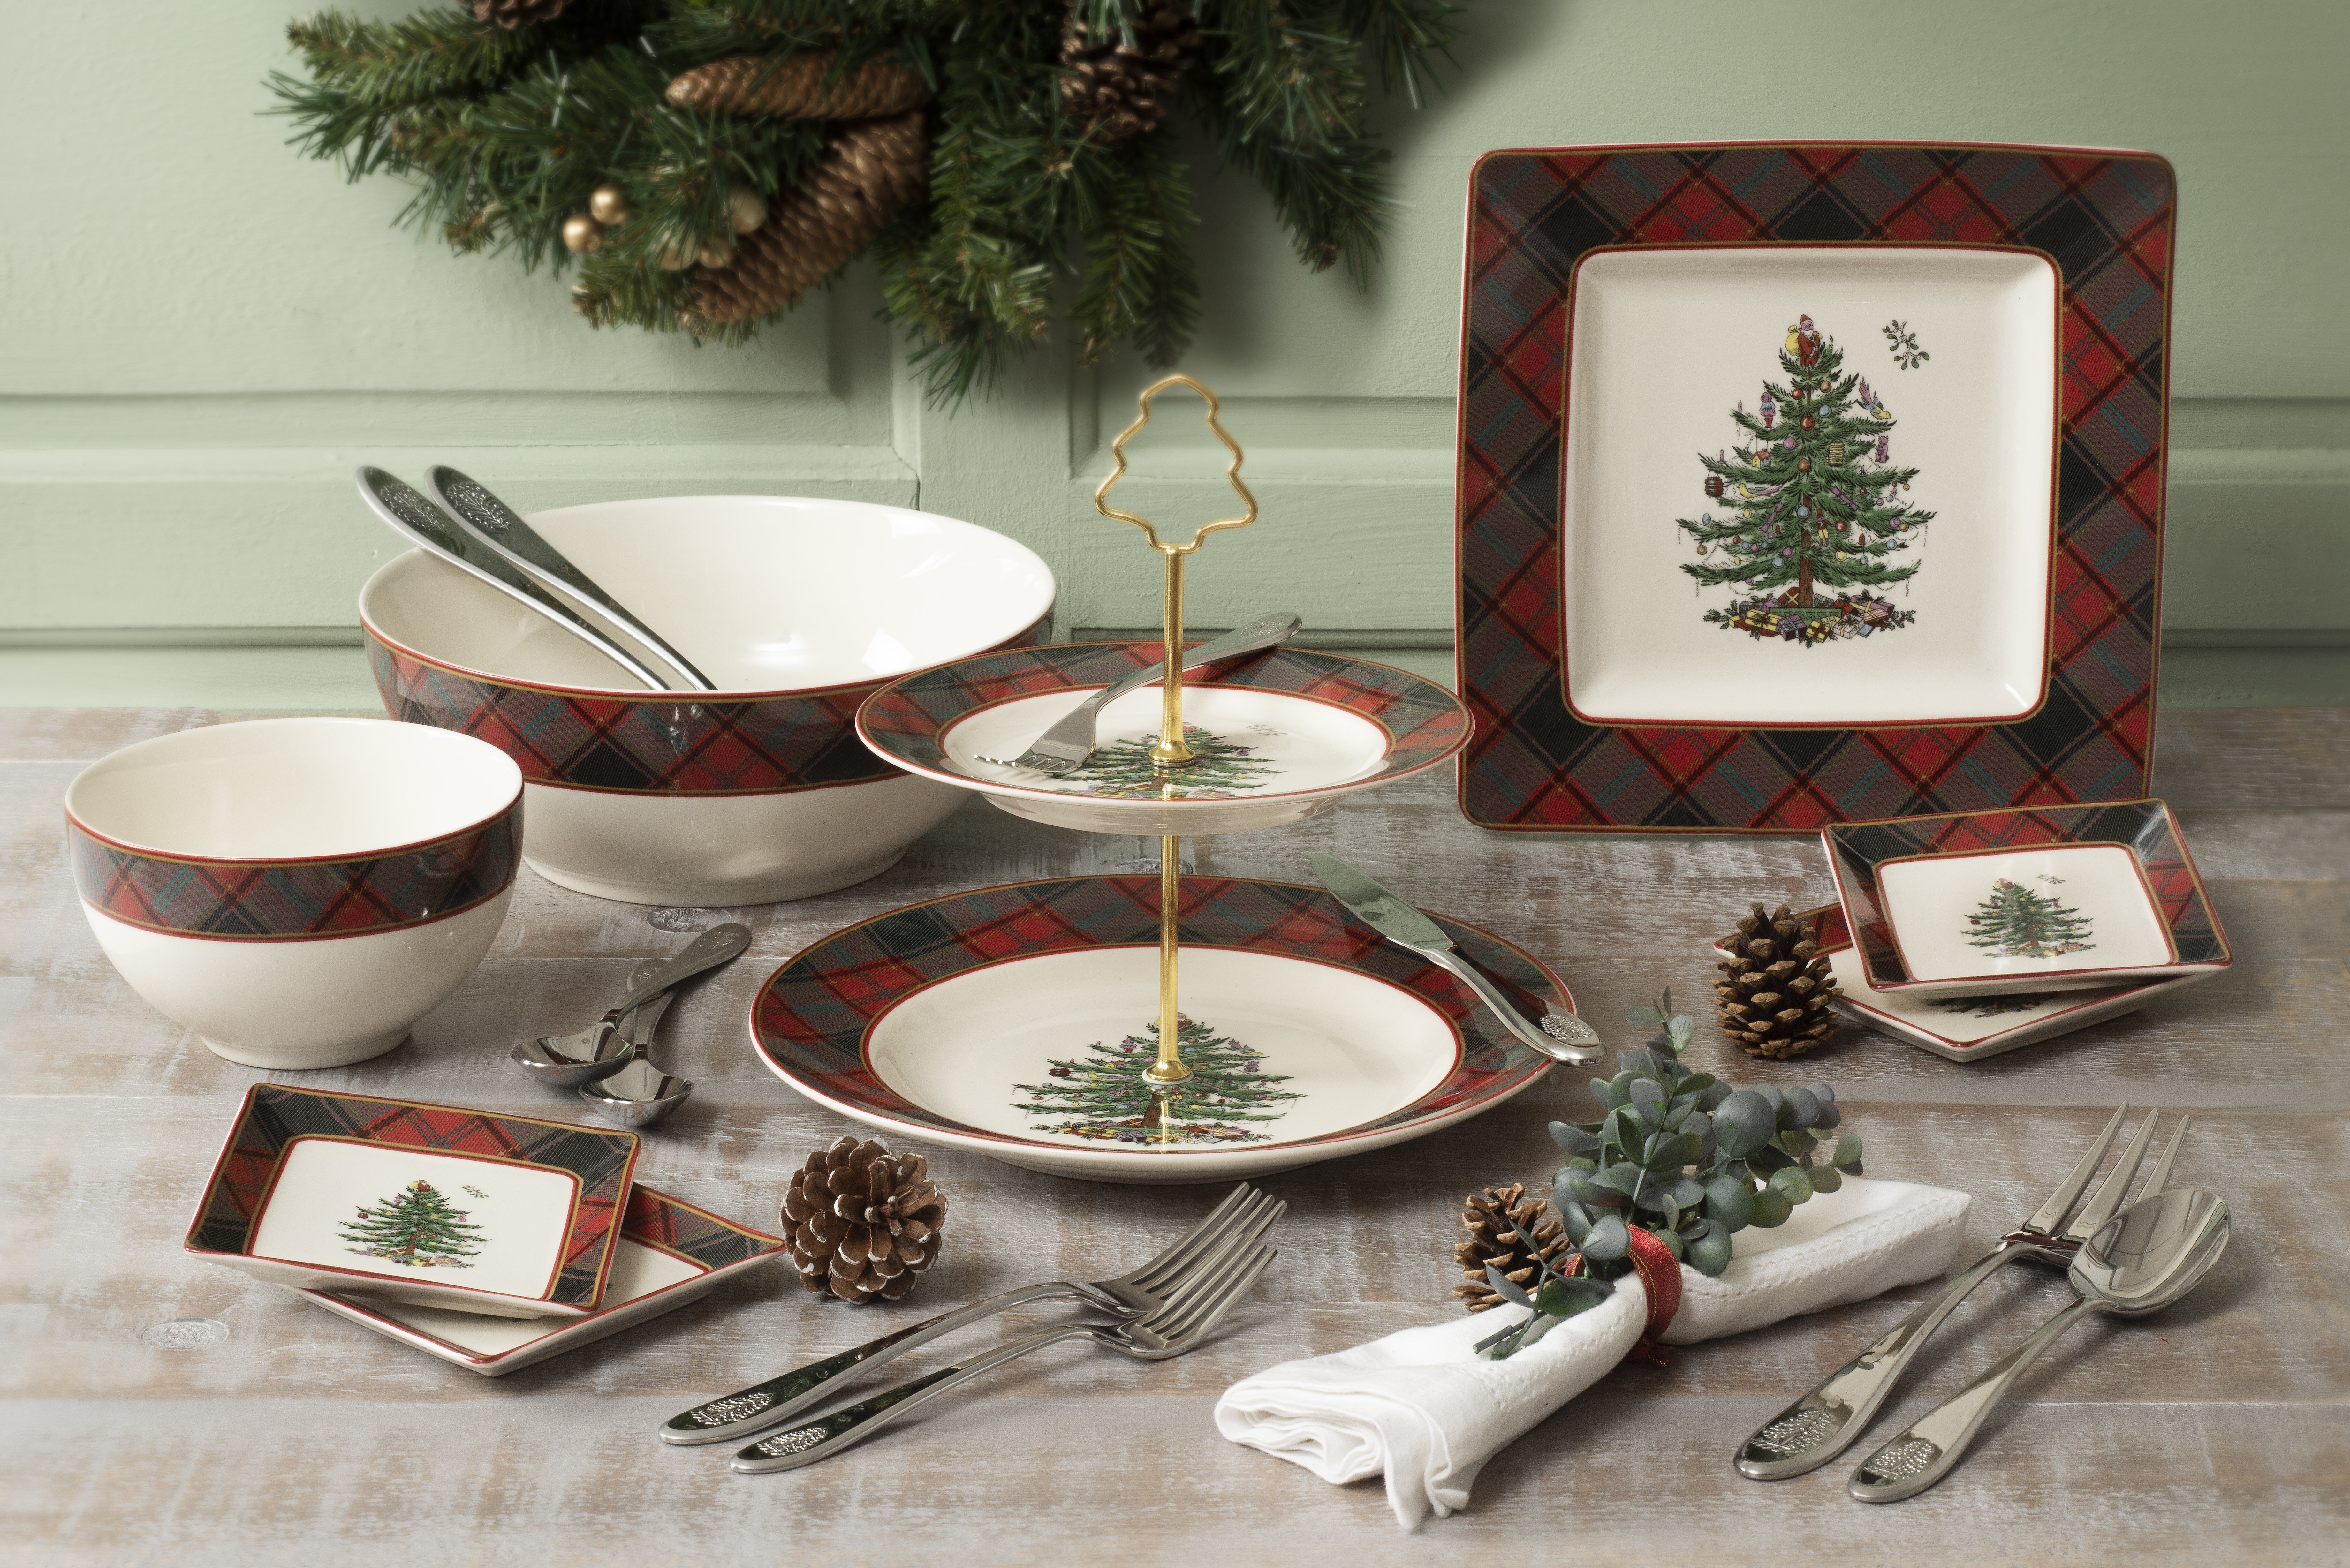 Spode Christmas Plates: Add Charm to Your Holiday Table Setting